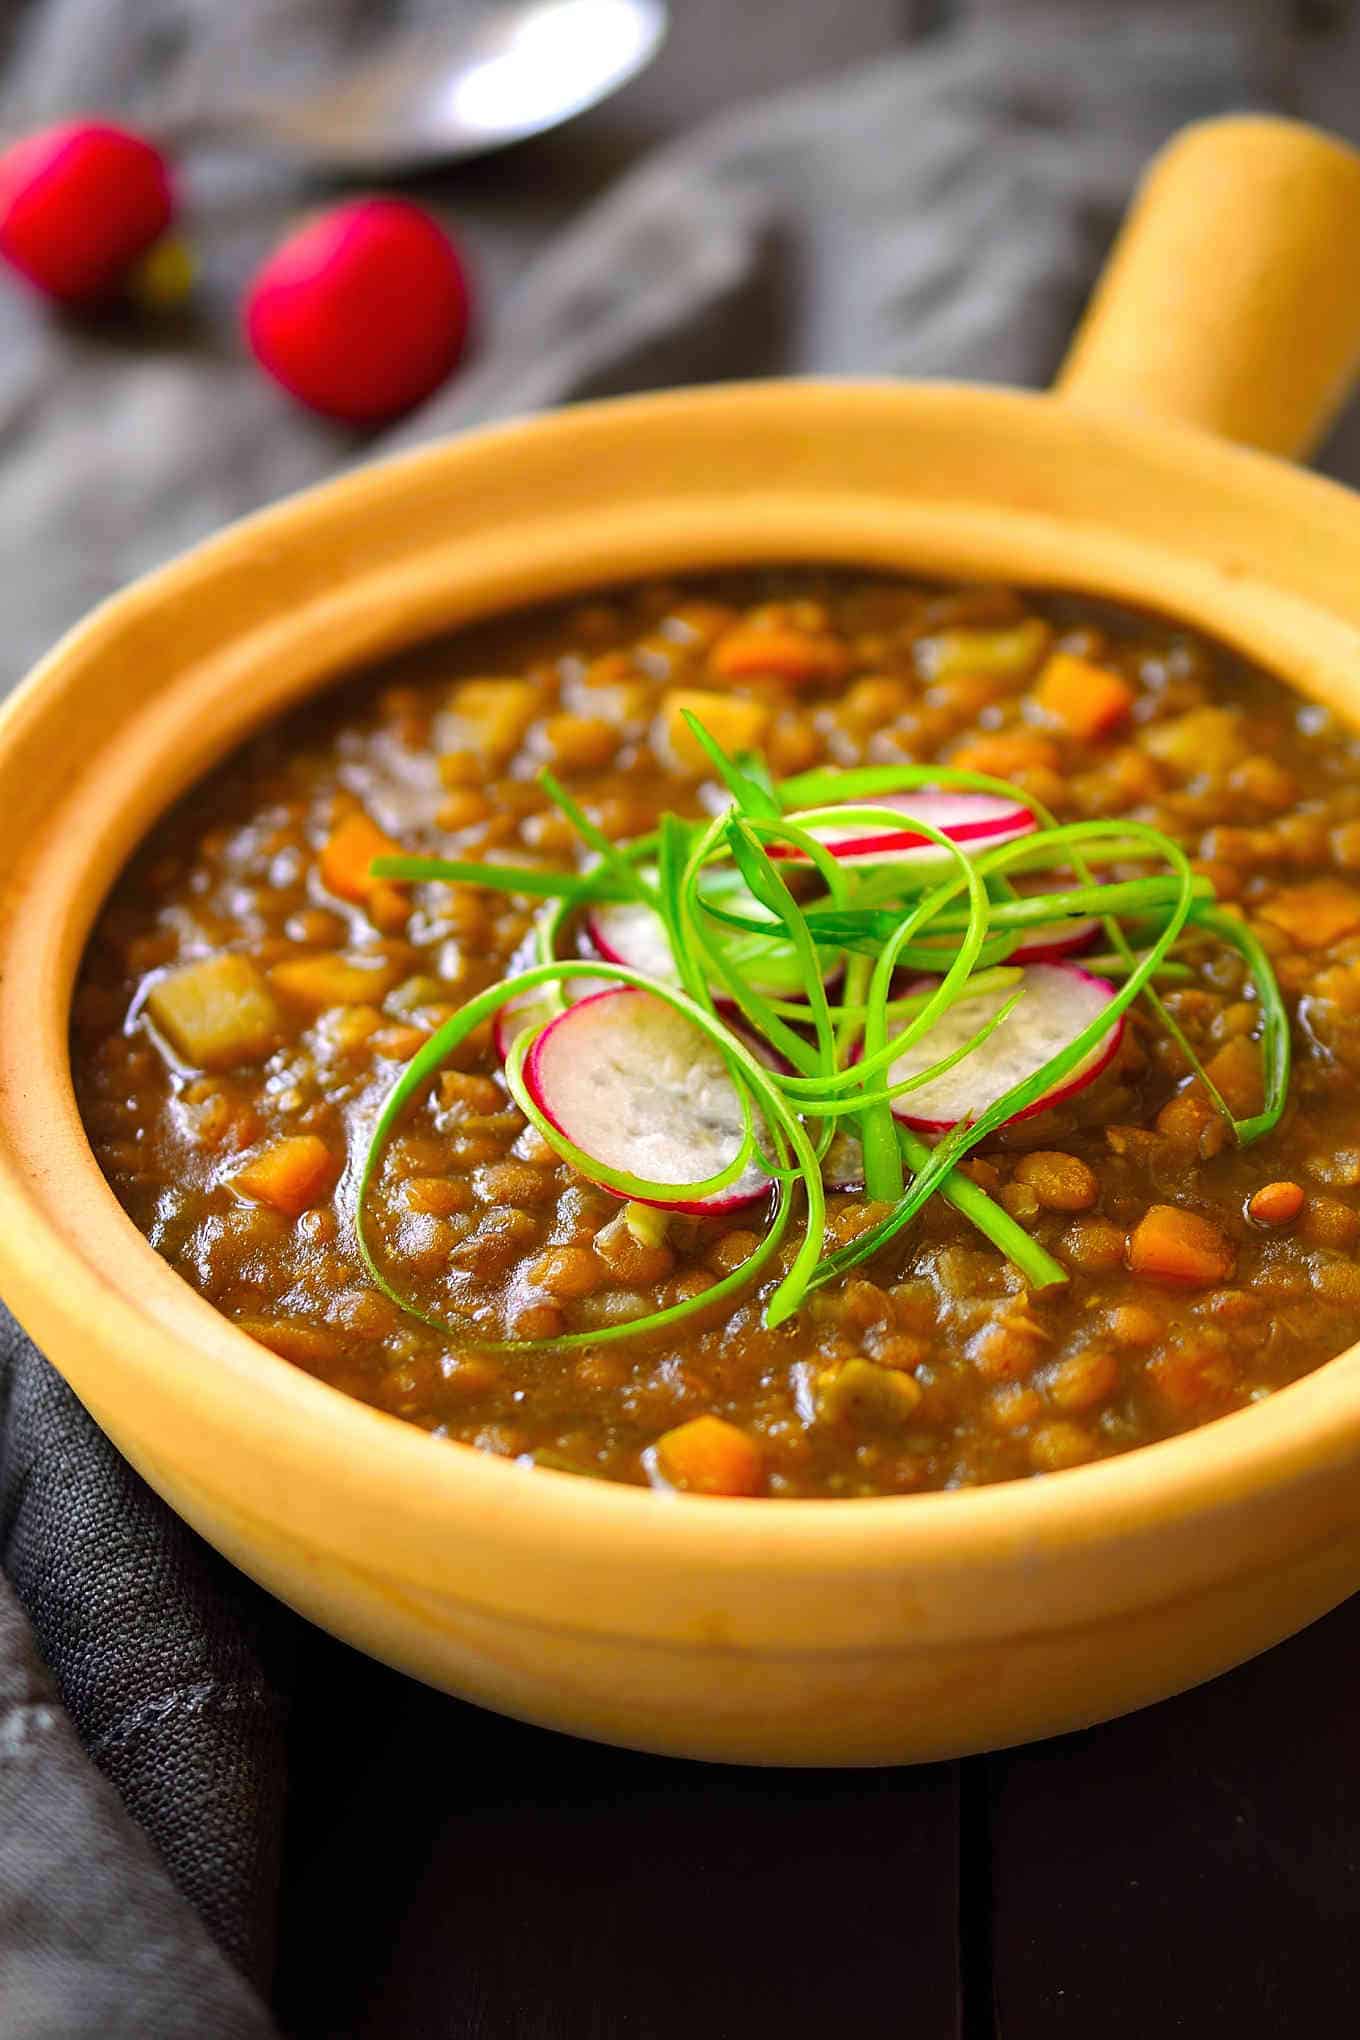 This Spanish-style vegan lentil stew is easy to make with very simple ingredients and perfect for vegans on a serious budget. Hearty and comforting, this oil-free recipe is great as a plant-based main dish for chilly evenings or as a side for a summer barbeque or picnic. It’s a freezer-friendly meal that comes in at only $0.46 a serving.